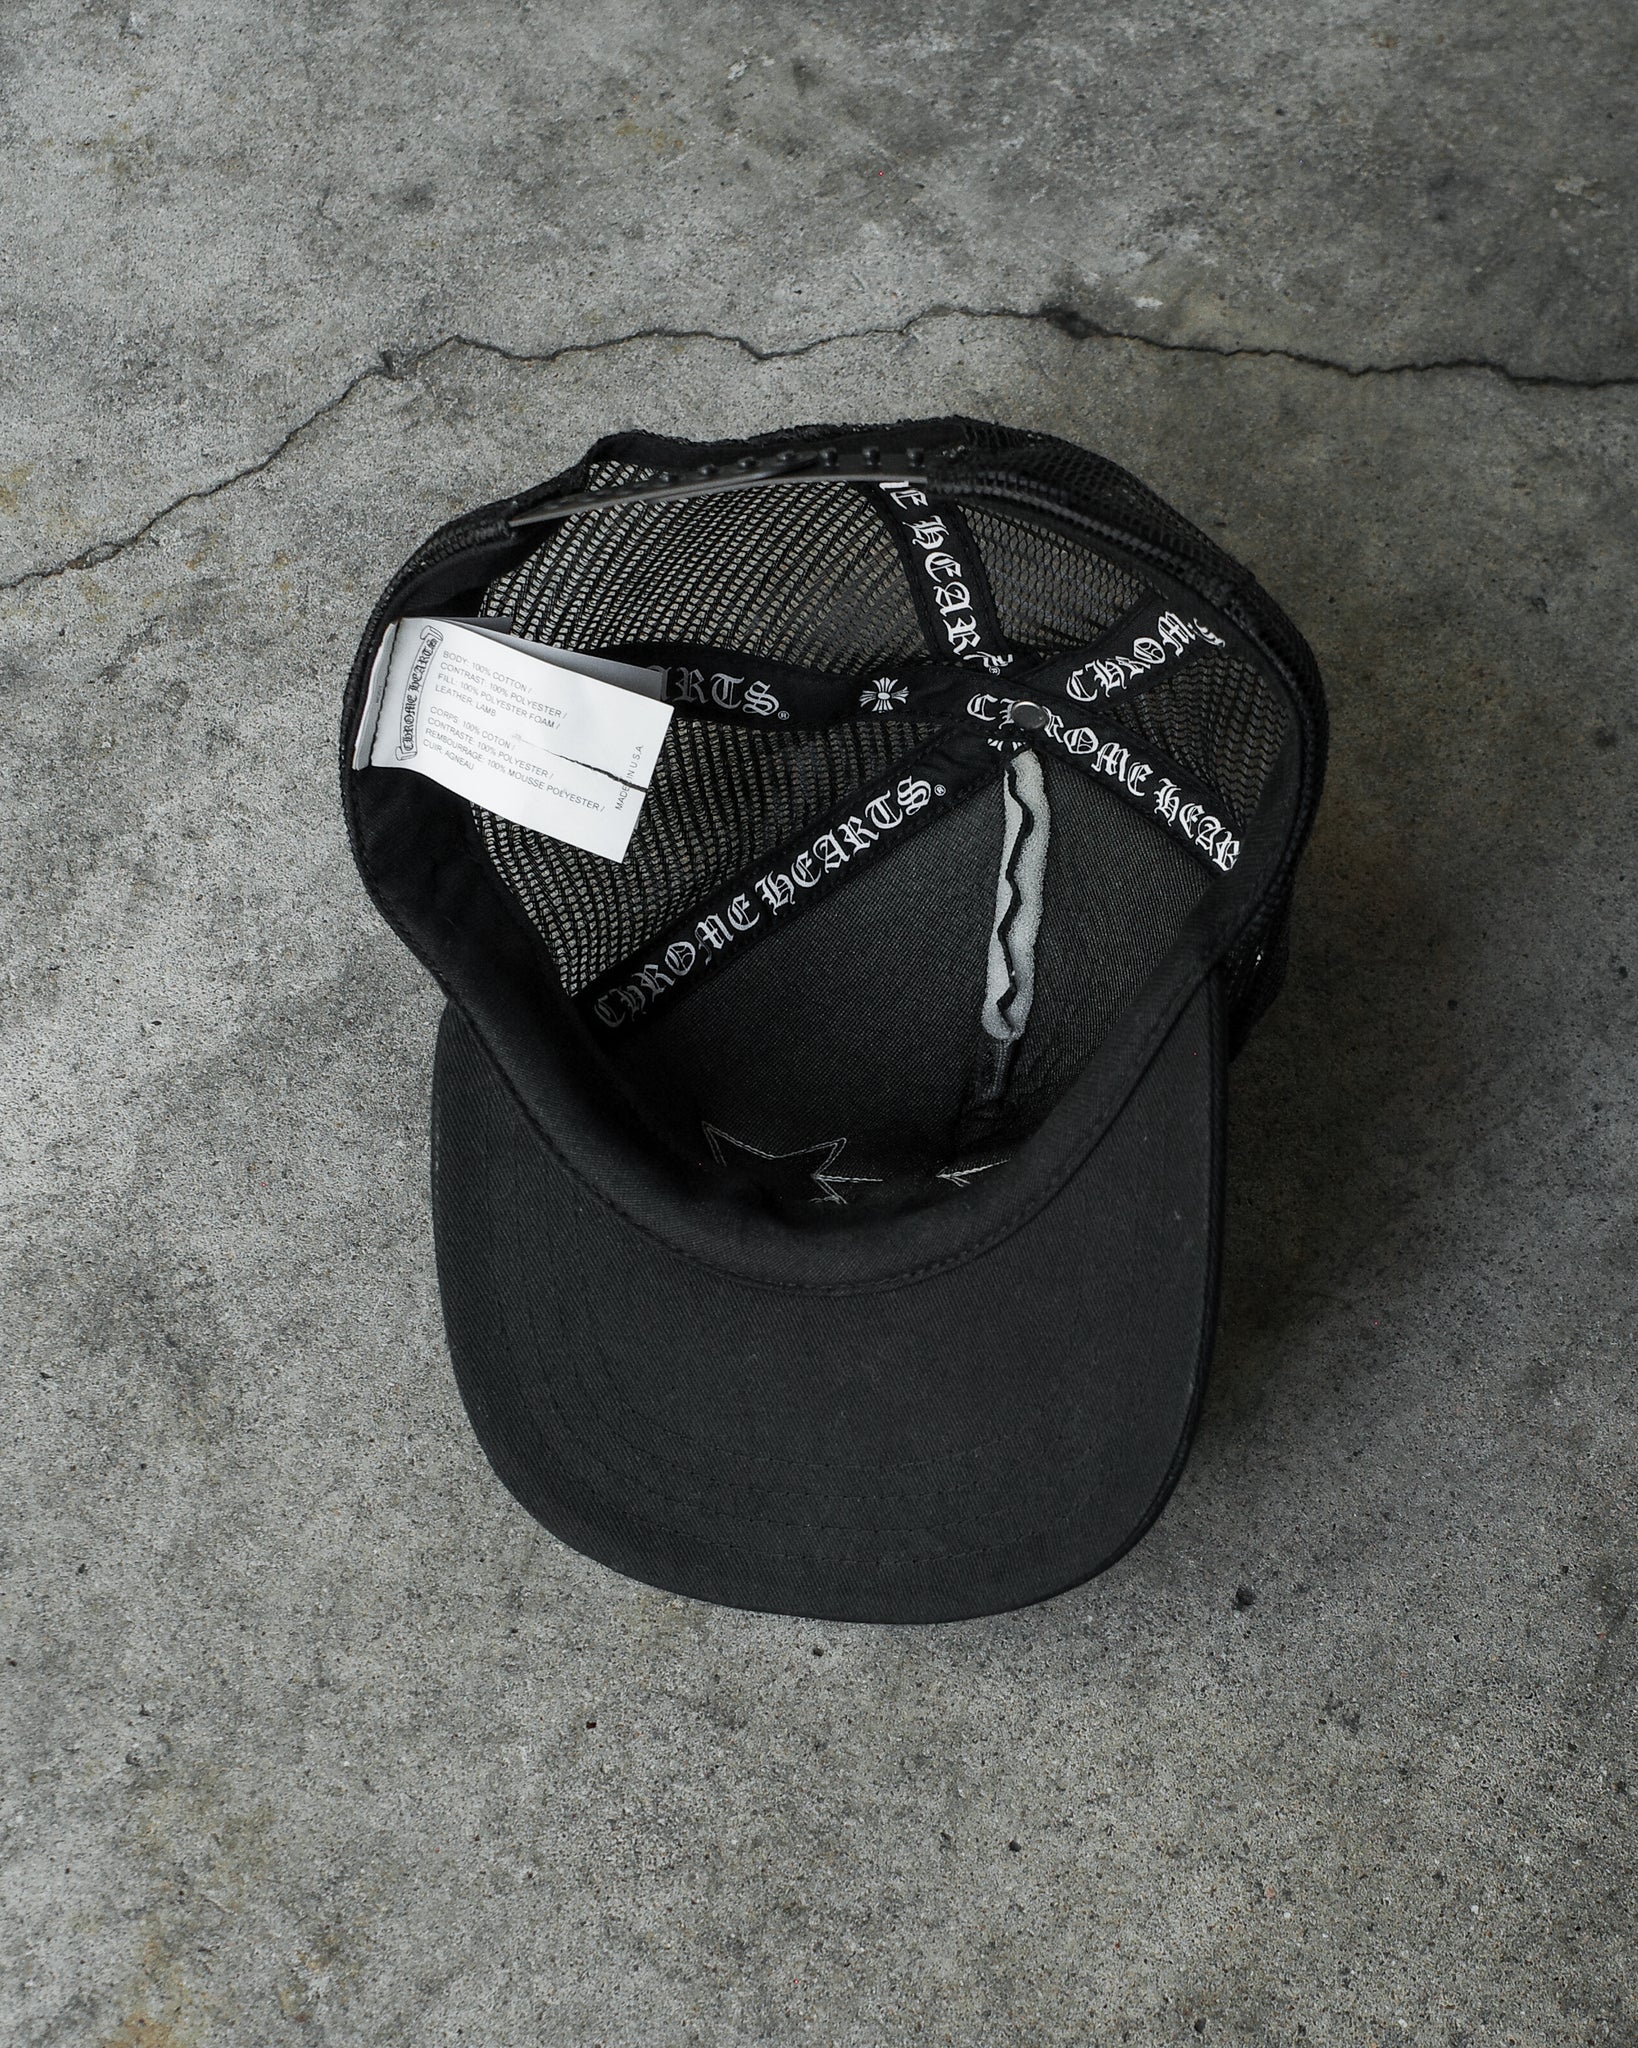 Chrome Hearts Star Patches Trucker Hat